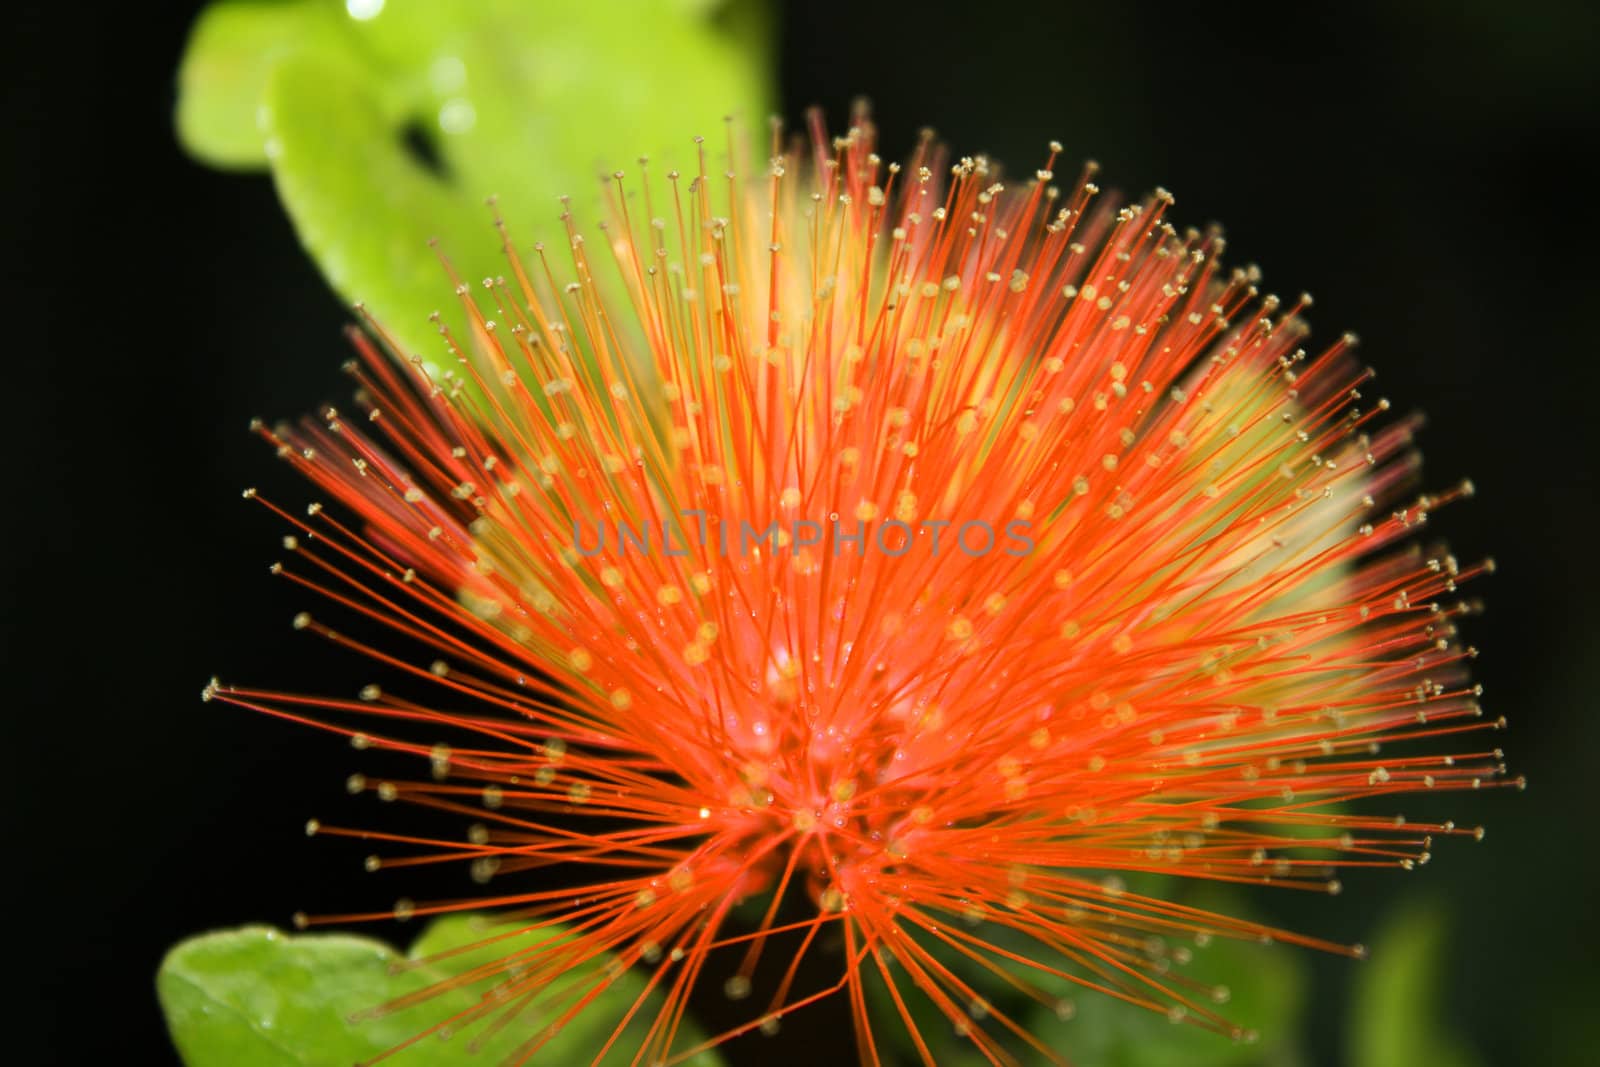 A beautiful orange colored tropical flower with delicate pollen structre.